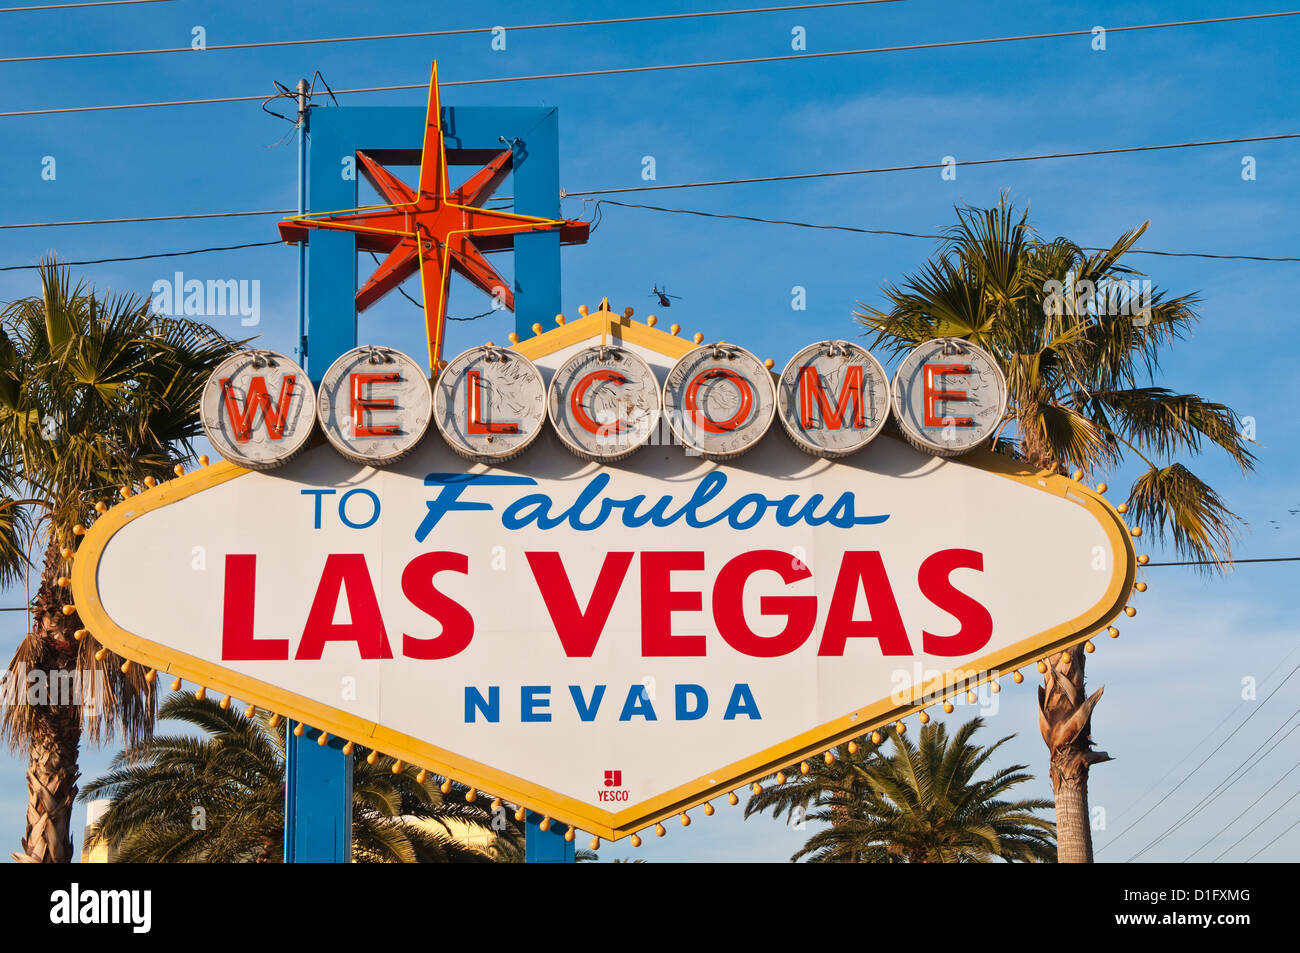 Welcome to Las Vegas sign, Las Vegas, Nevada, United States of America, North America Stock Photo